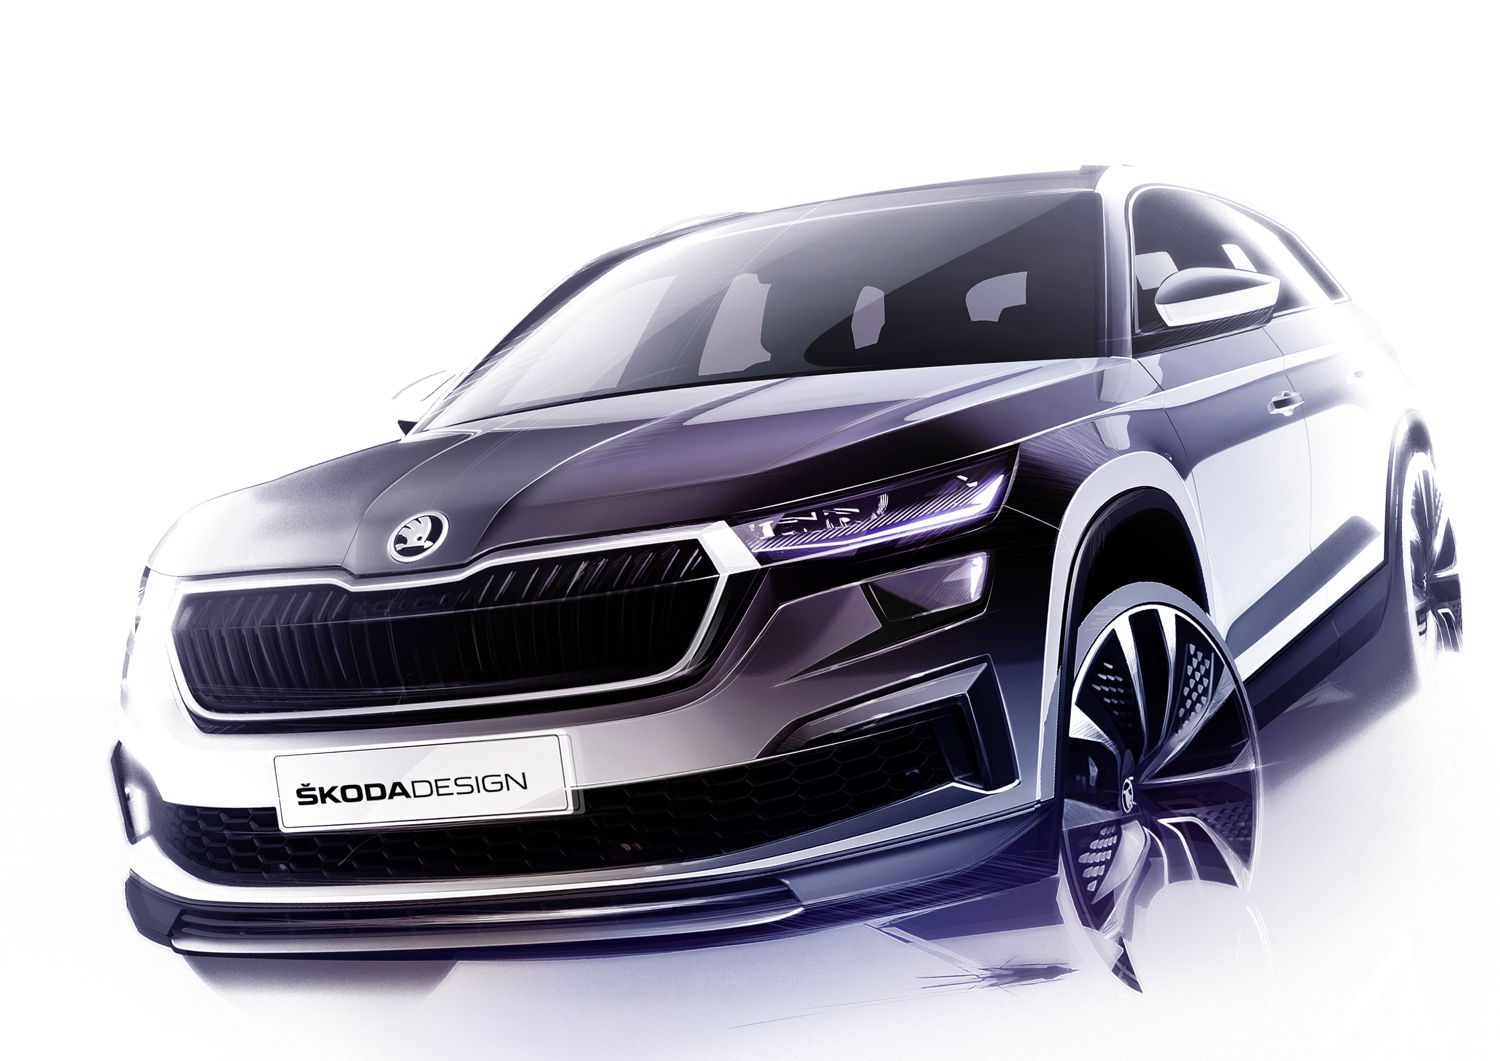 An official design sketch illustrating the front of the updated ŠKODA KODIAQ shows a redesigned bonnet, a more upright and now hexagonal ŠKODA grille as well as slimmer full LED headlights.